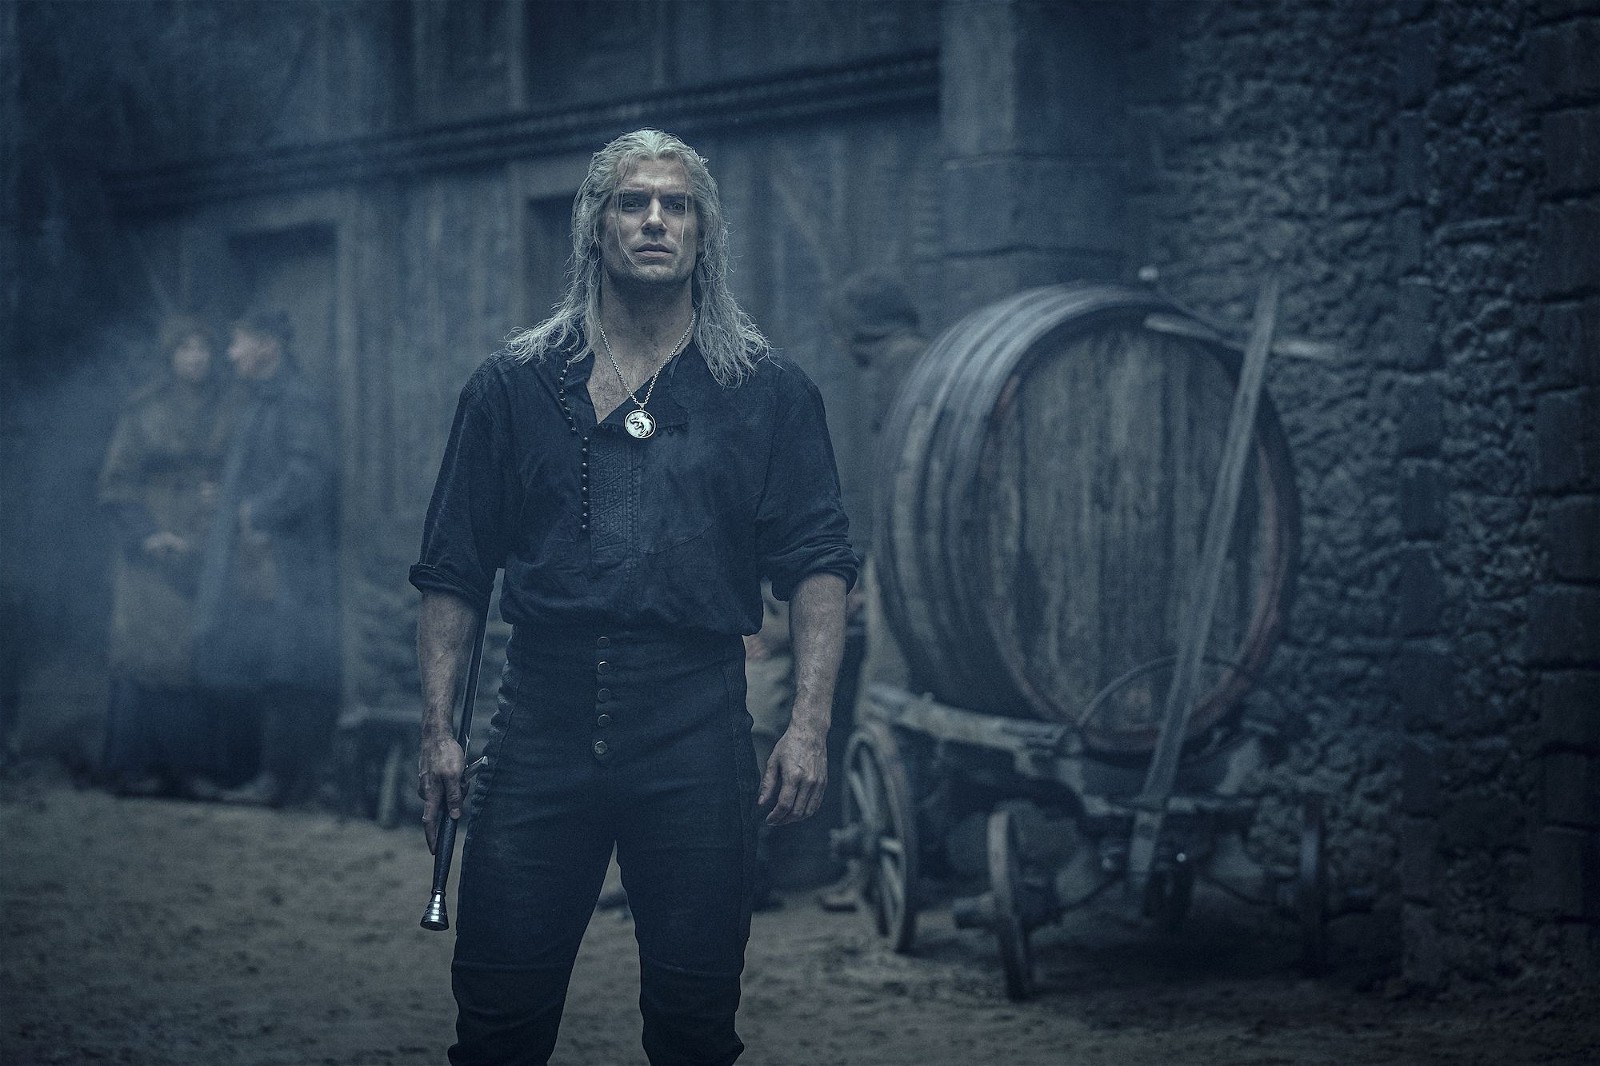 Henry Cavill in and as The Witcher.